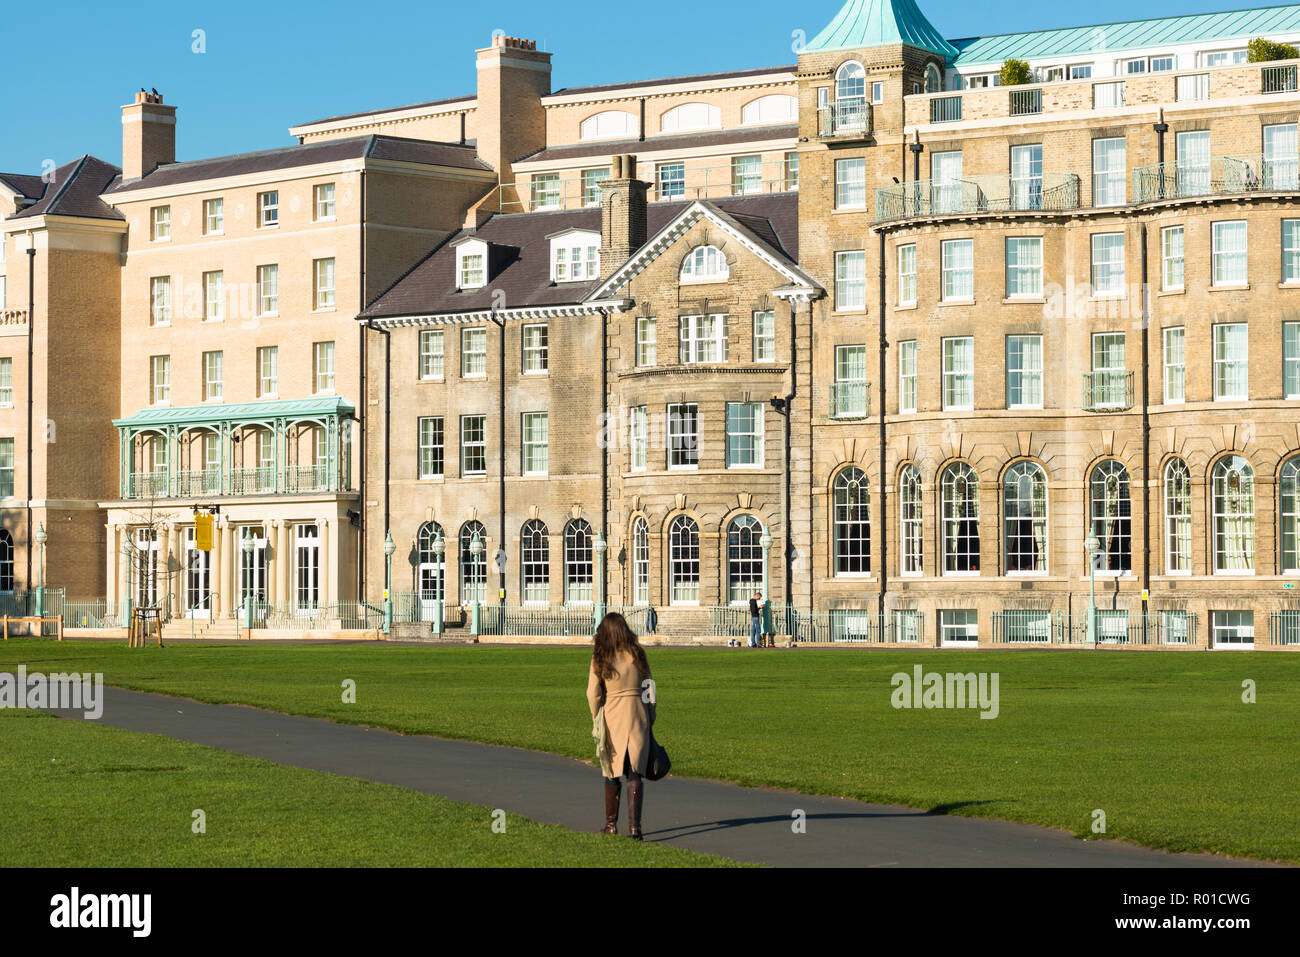 The newly restored University Arms Hotel seen from Parker's Piece, Cambridge, England, UK Stock Photo